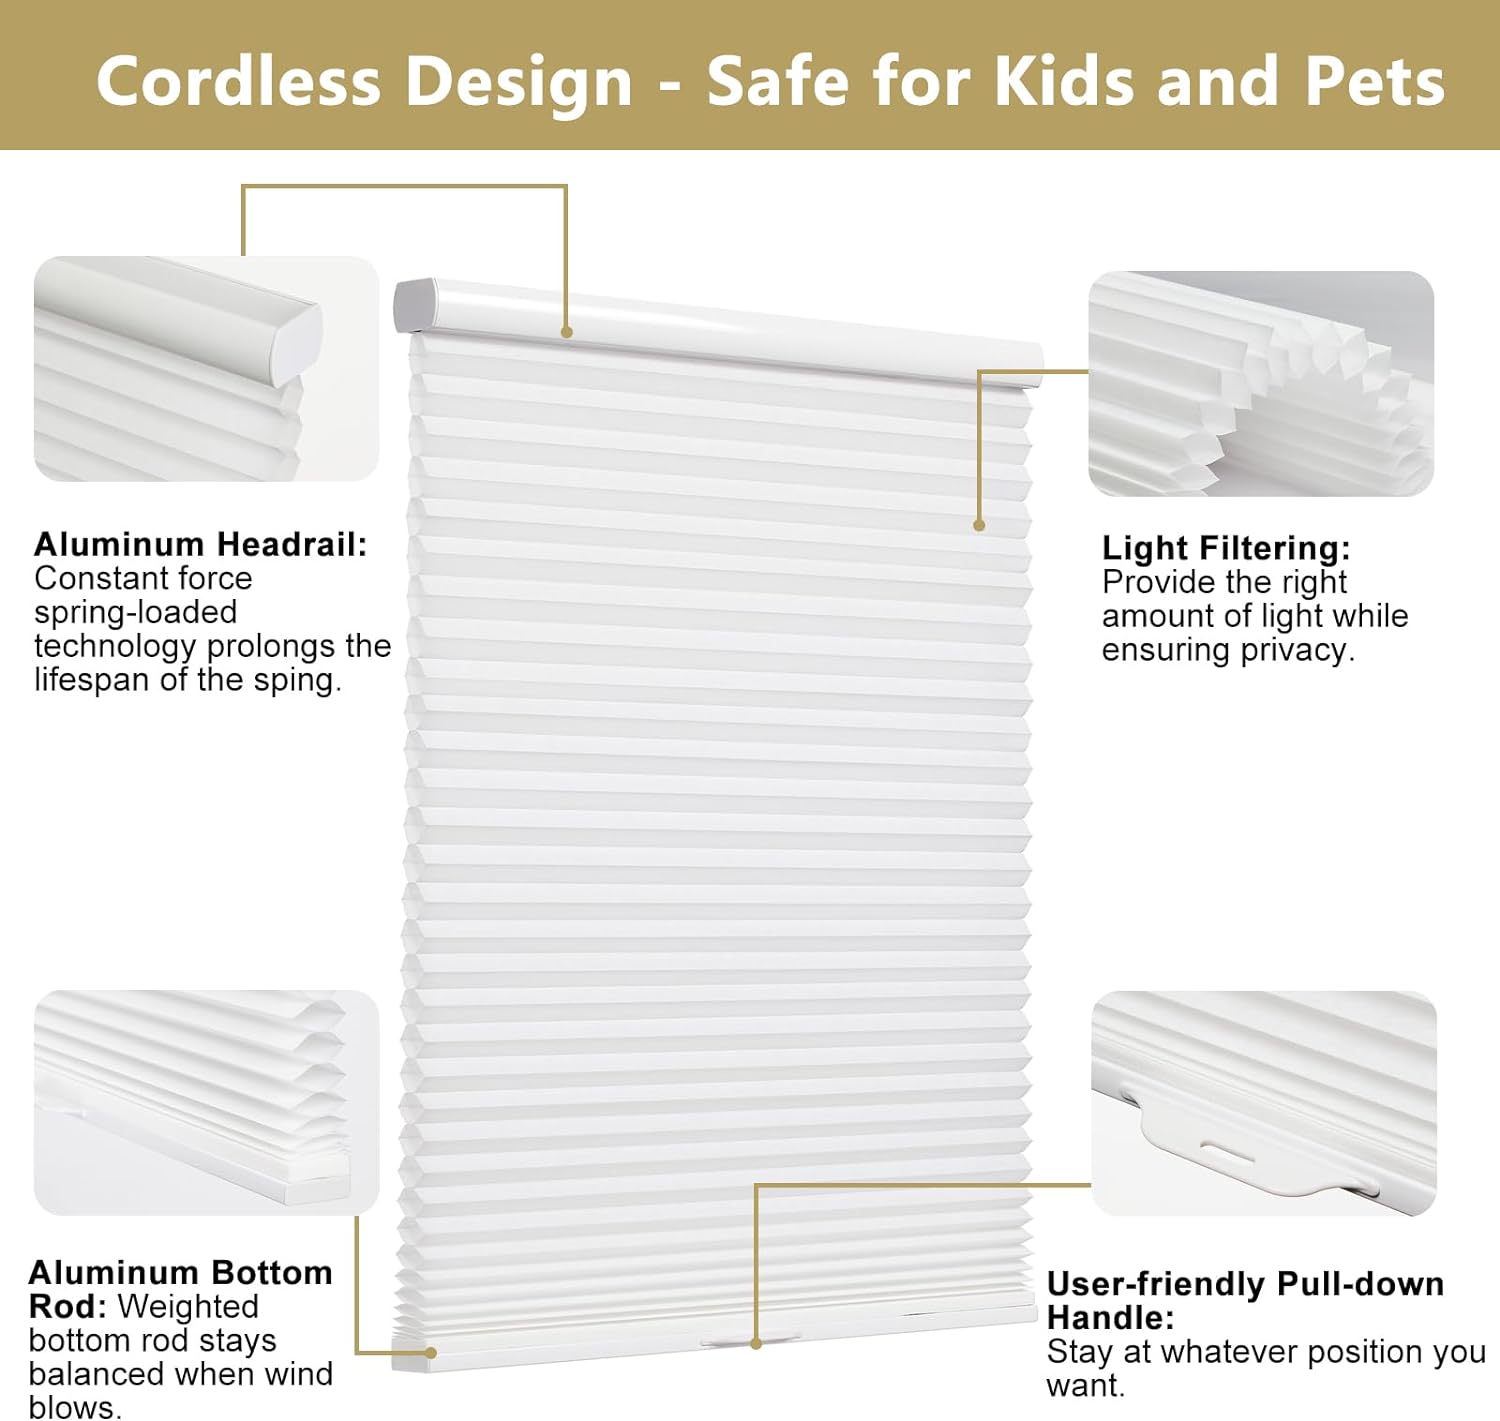 Cordless honeycomb cellular blind showcasing aluminum headrail, light filtering capabilities, weighted bottom rod, and pull-down handle, emphasizing safety for kids and pets.